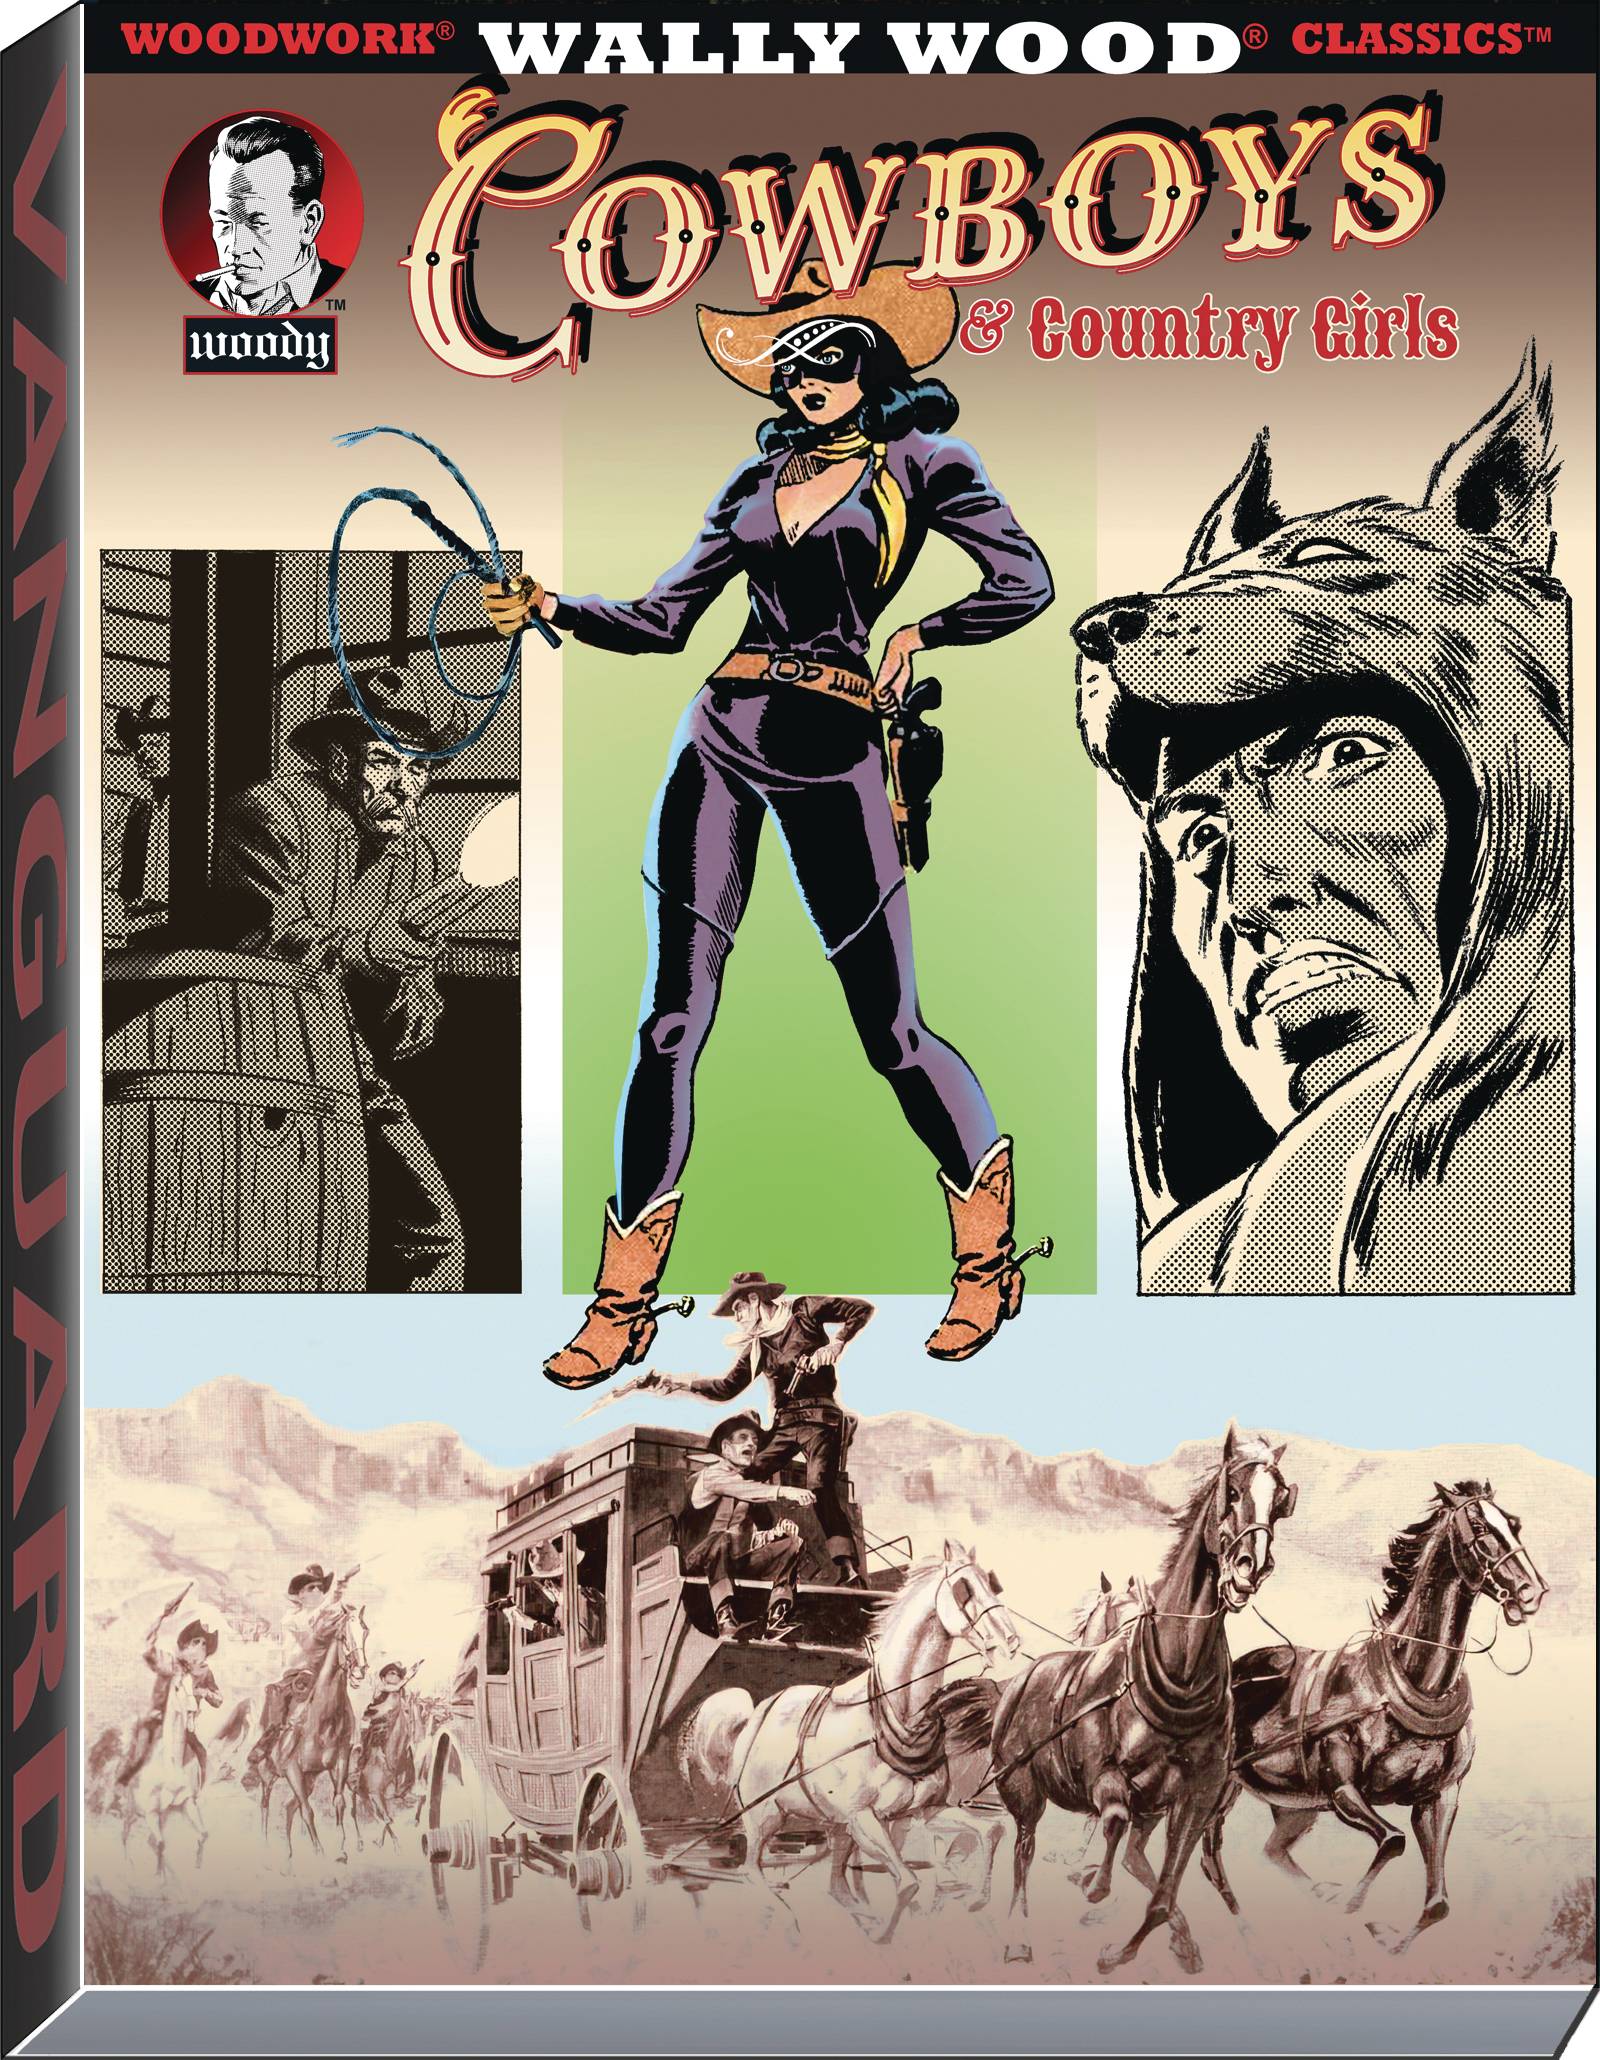 The One Stop Shop Comics & Games Wally Wood Cowboys & Country Girls Sc (C: 0-1-2) (12/28/2022) VANGUARD PRODUCTIONS